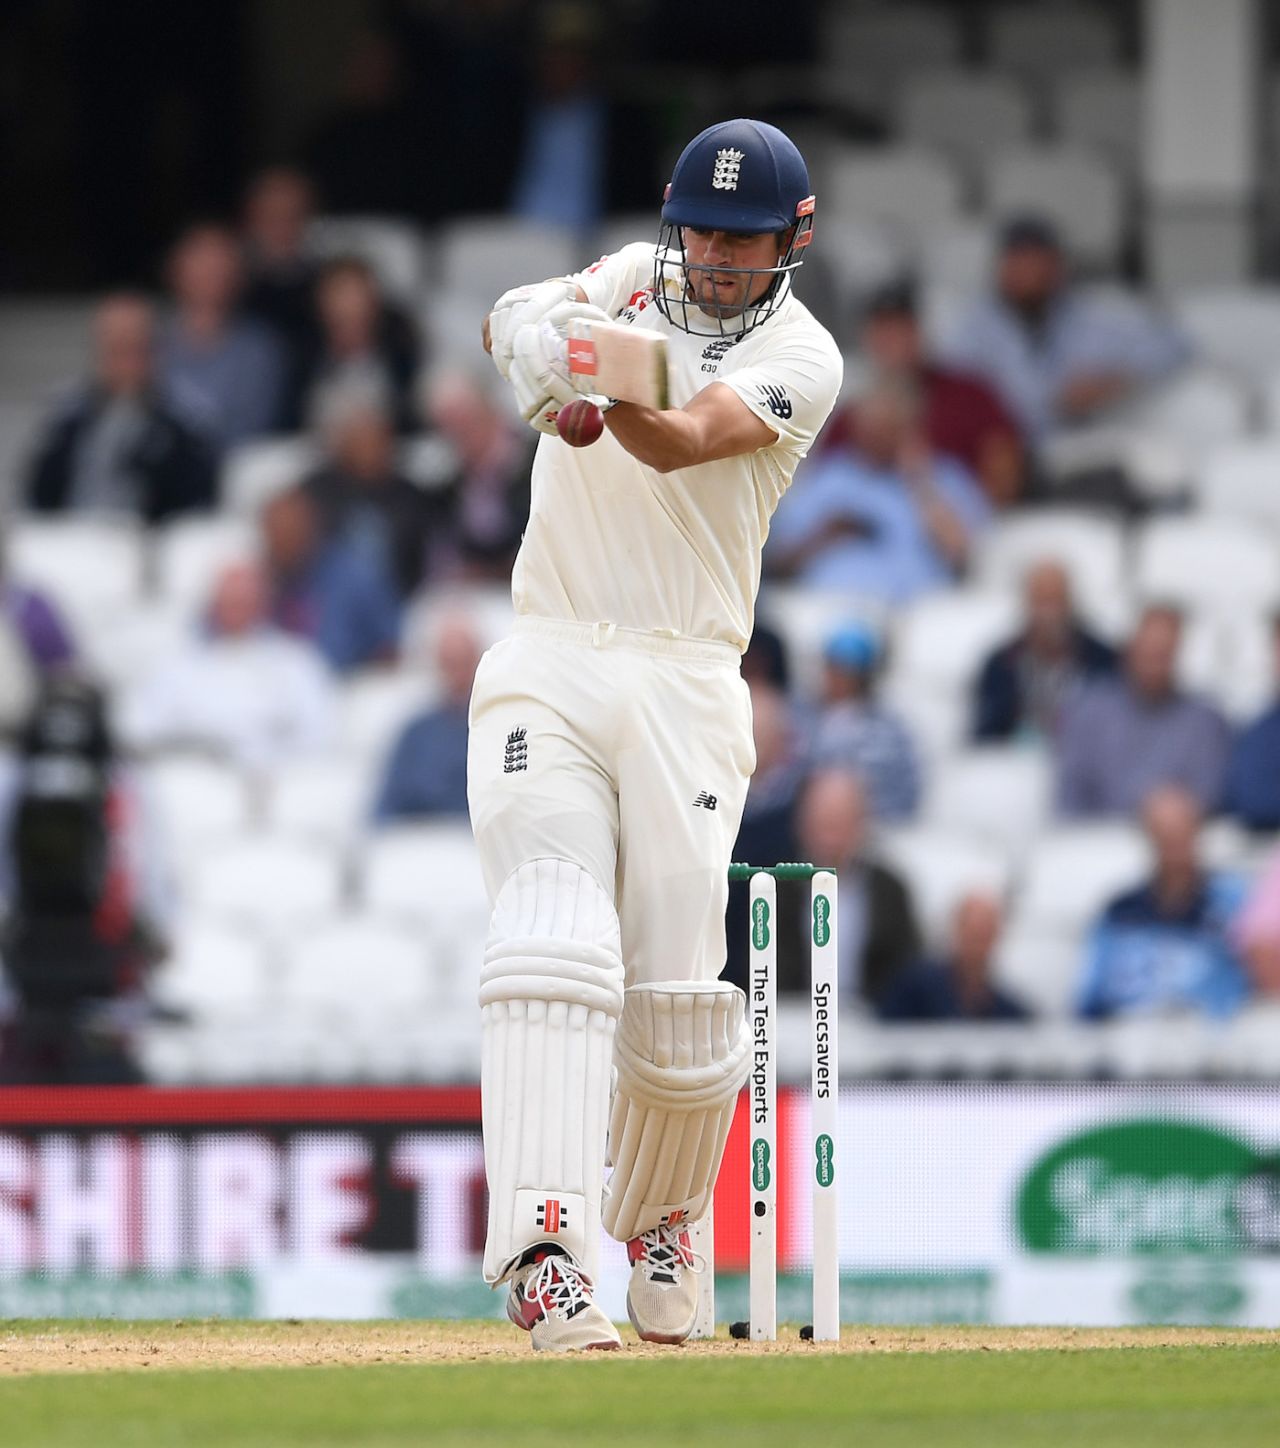 Alastair Cook lines up to pull the ball, England v India, 5th Test, The Oval, 4th day, September 10, 2018